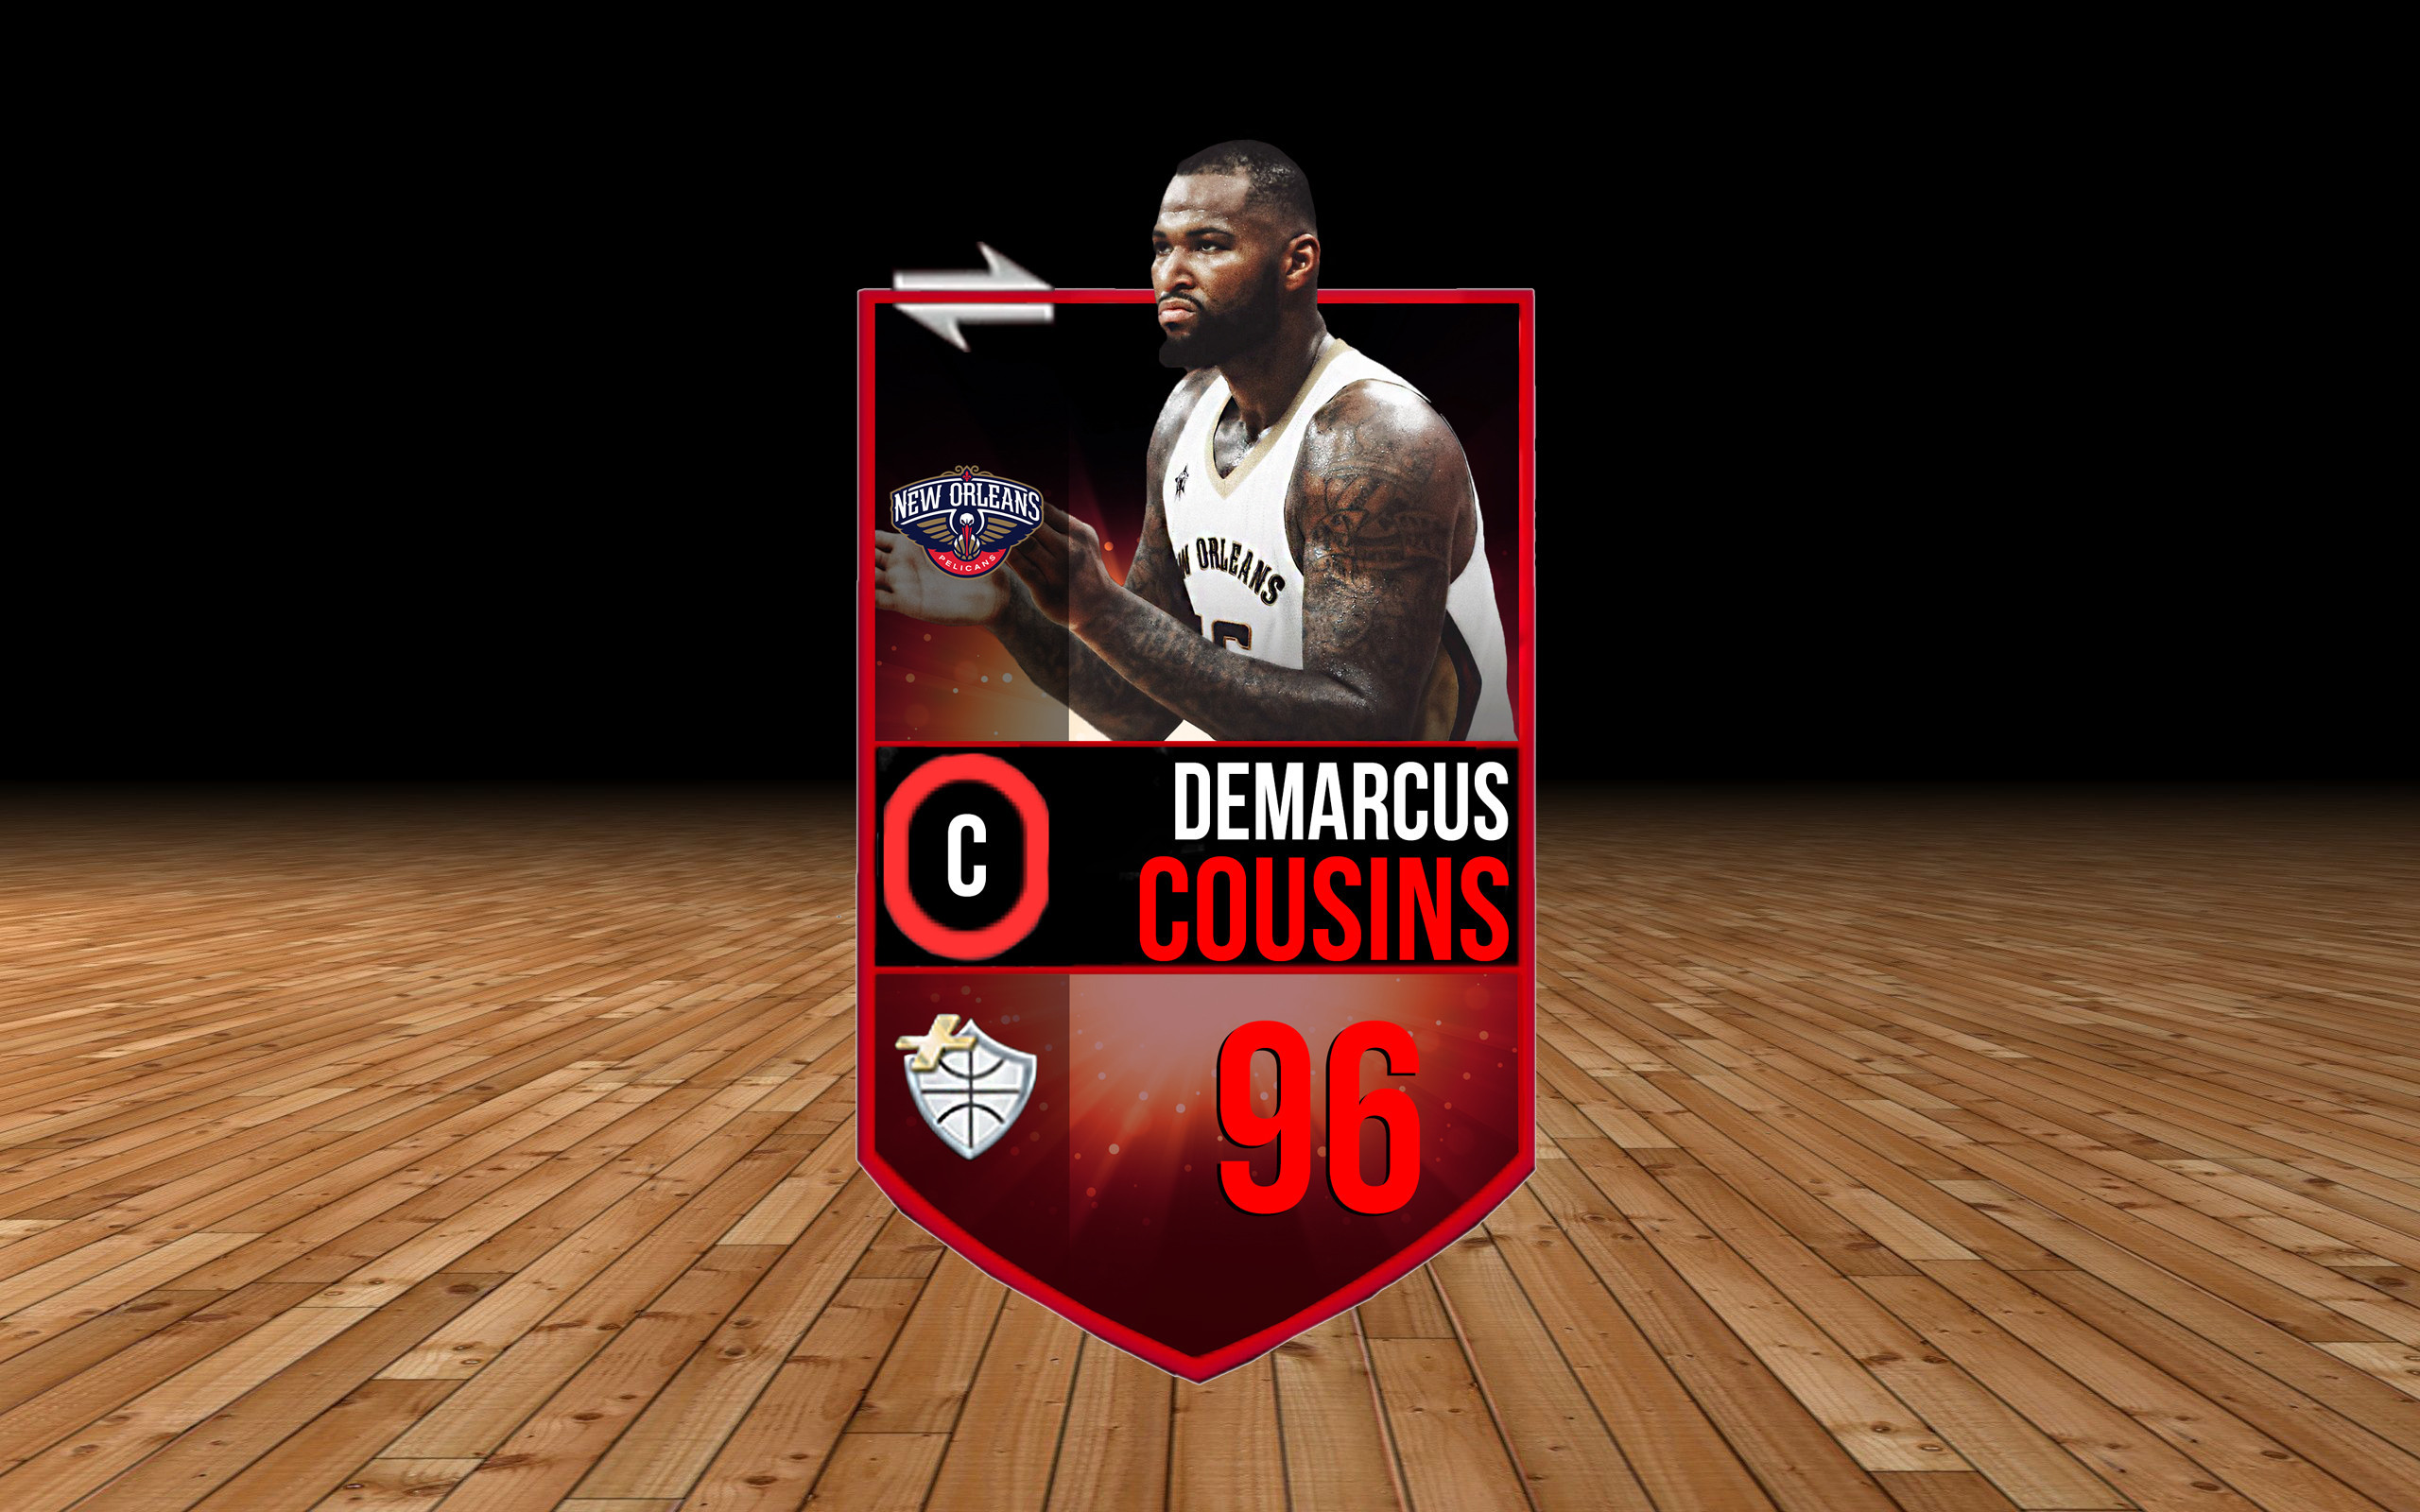 2560x1600 Sooo yesterday Boogie was traded to the Pelicans... why not make a card art  of him?